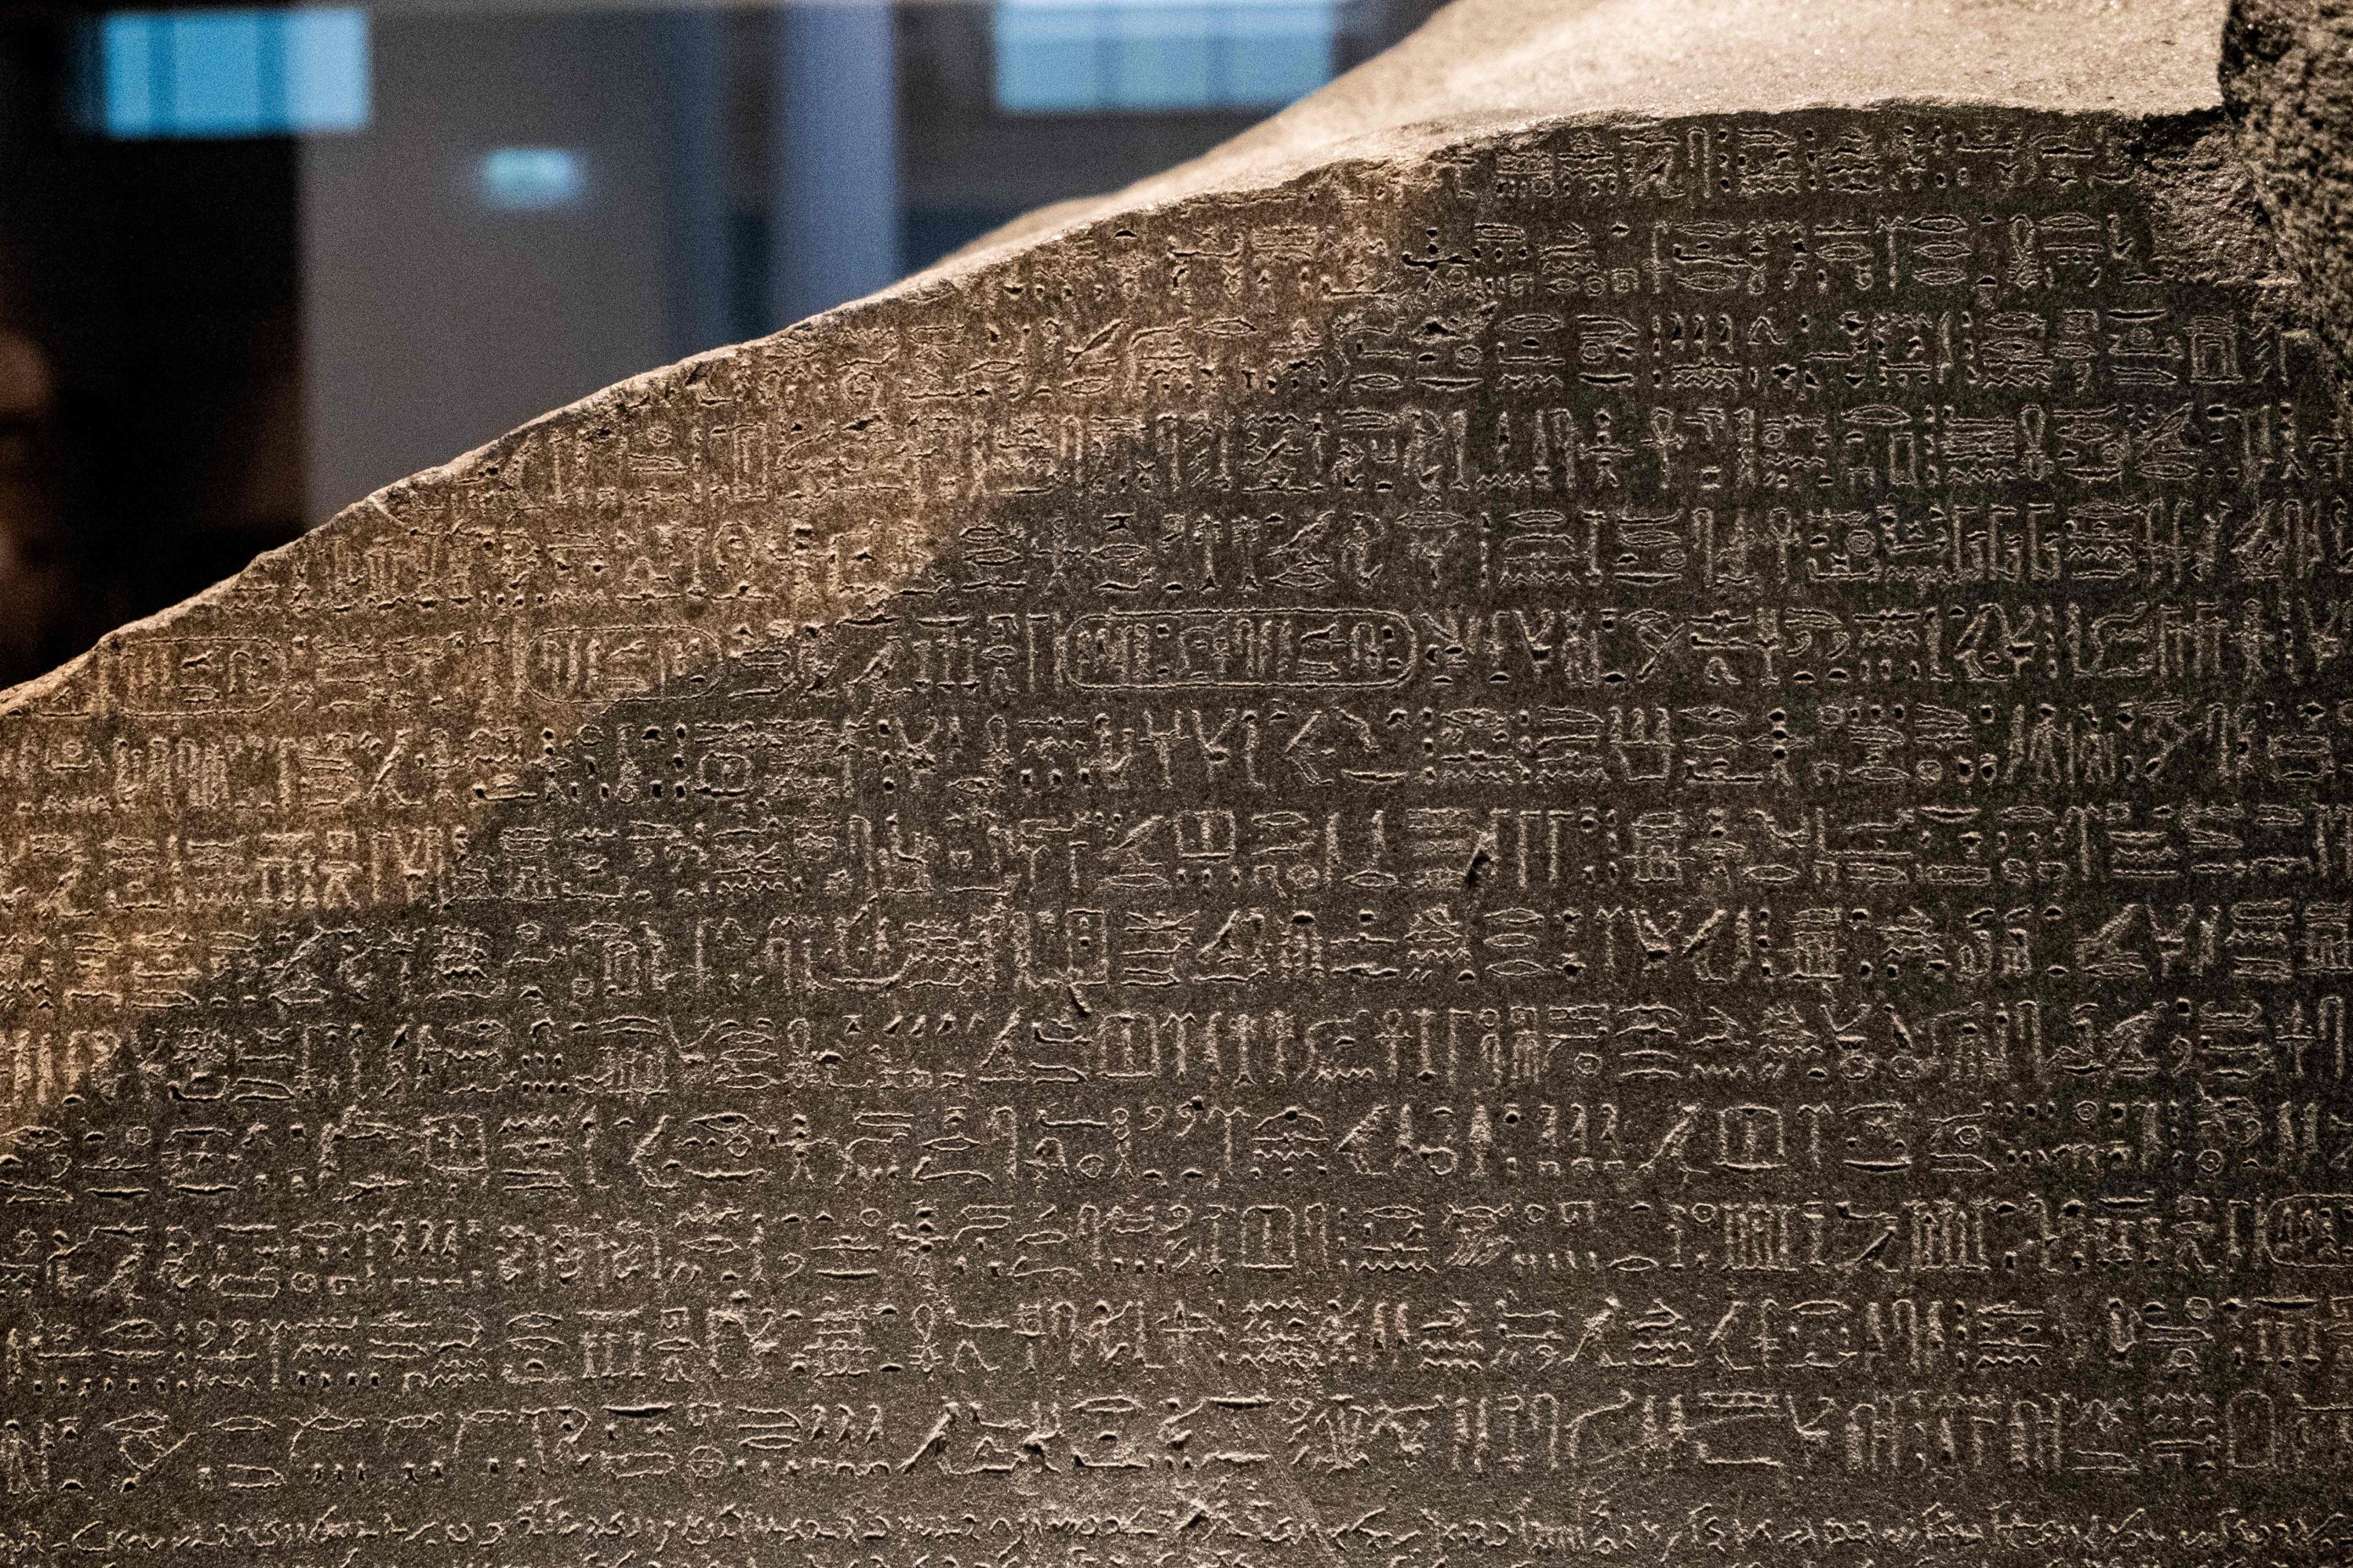 A view of the top portion of the Rosetta Stone showing the ancient Egyptian hieroglyphic text, on display at the British Museum in London, U.K., July 26, 2022. (AFP Photo)